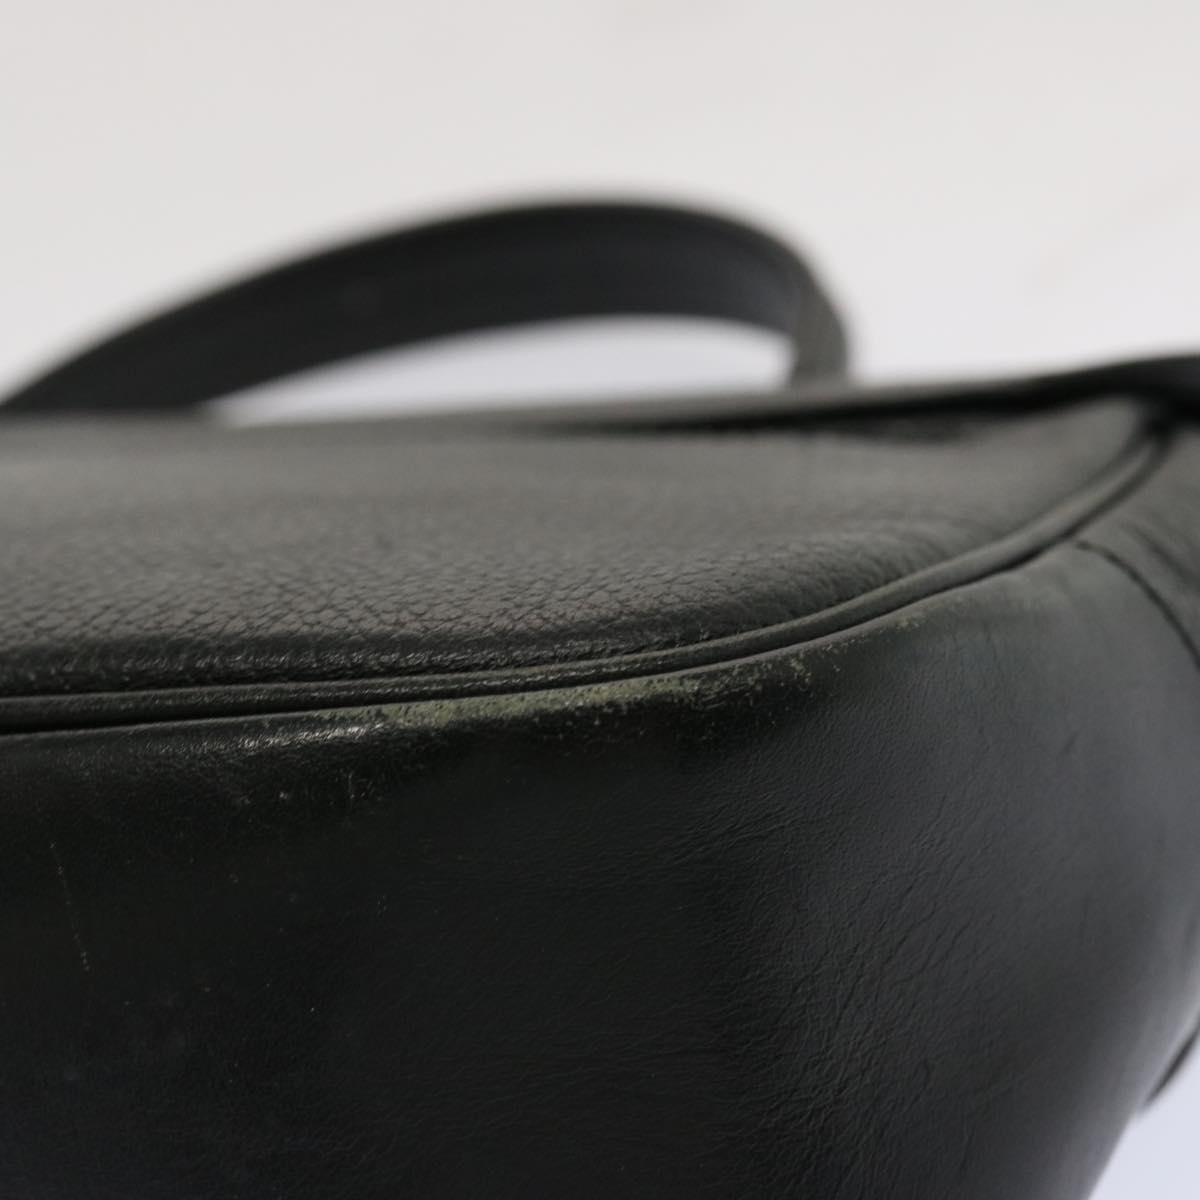 Burberrys Hand Bag Leather Black Auth 69546